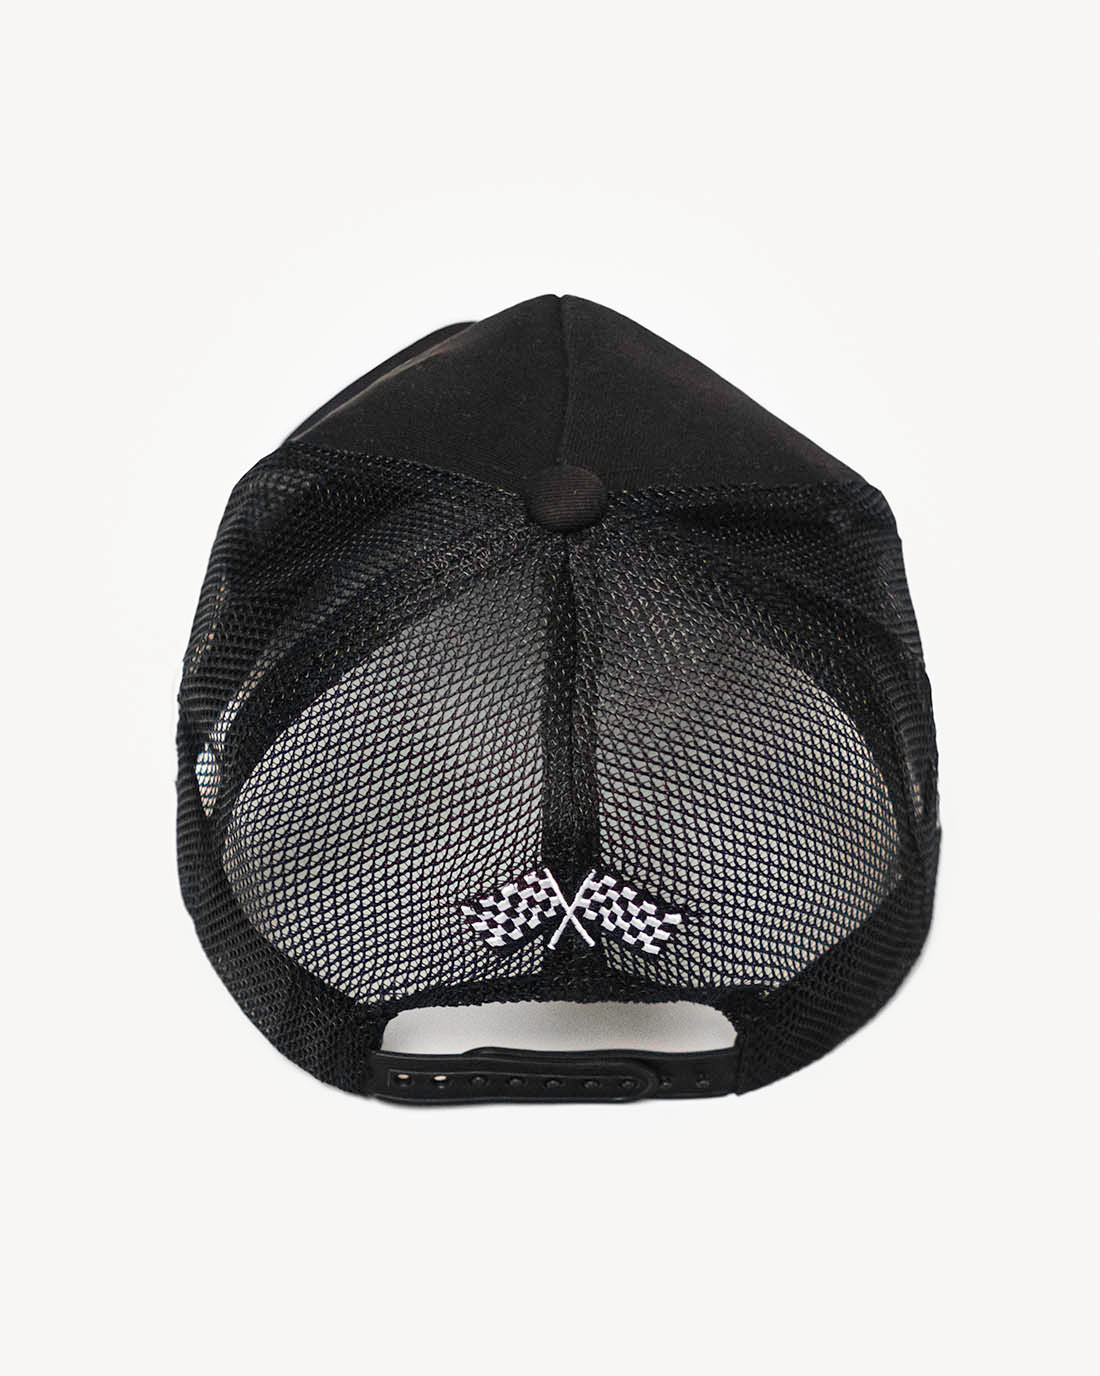 Rear view of a cute black snapback hat with racing-inspired embroidered design and cooling mesh back.